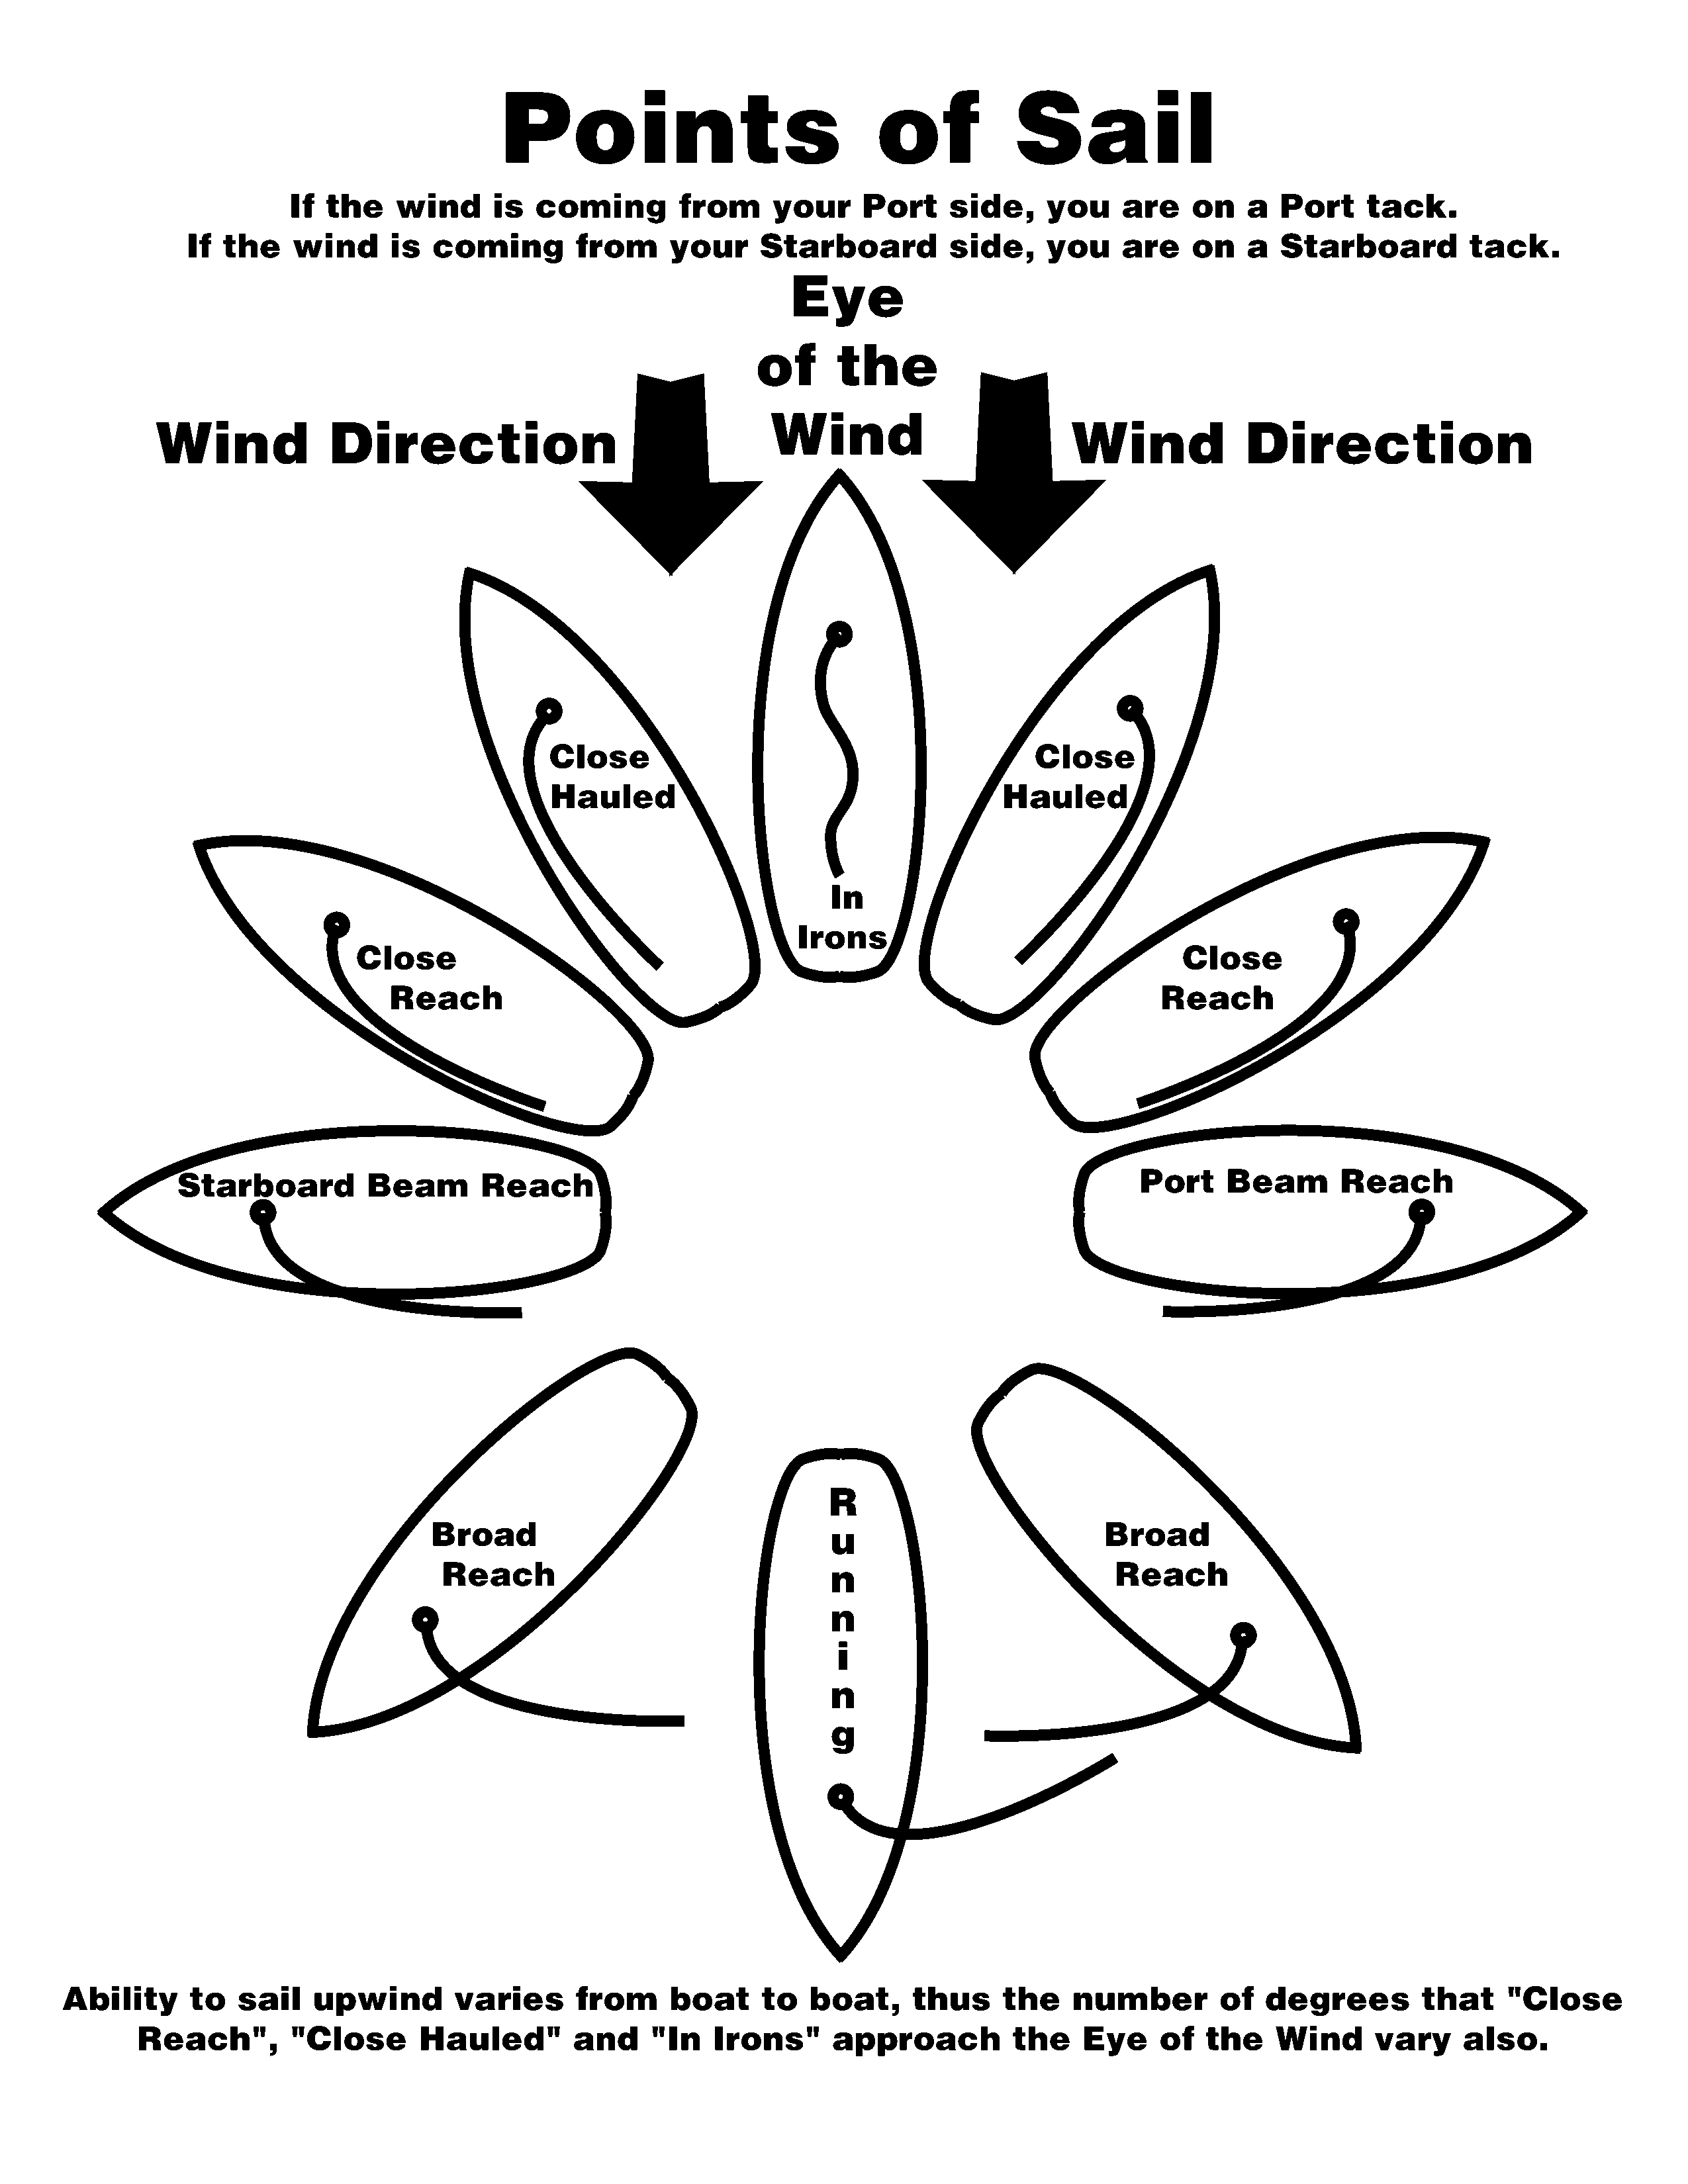 An illustration of the various Points of Sail in relation to the wind direction